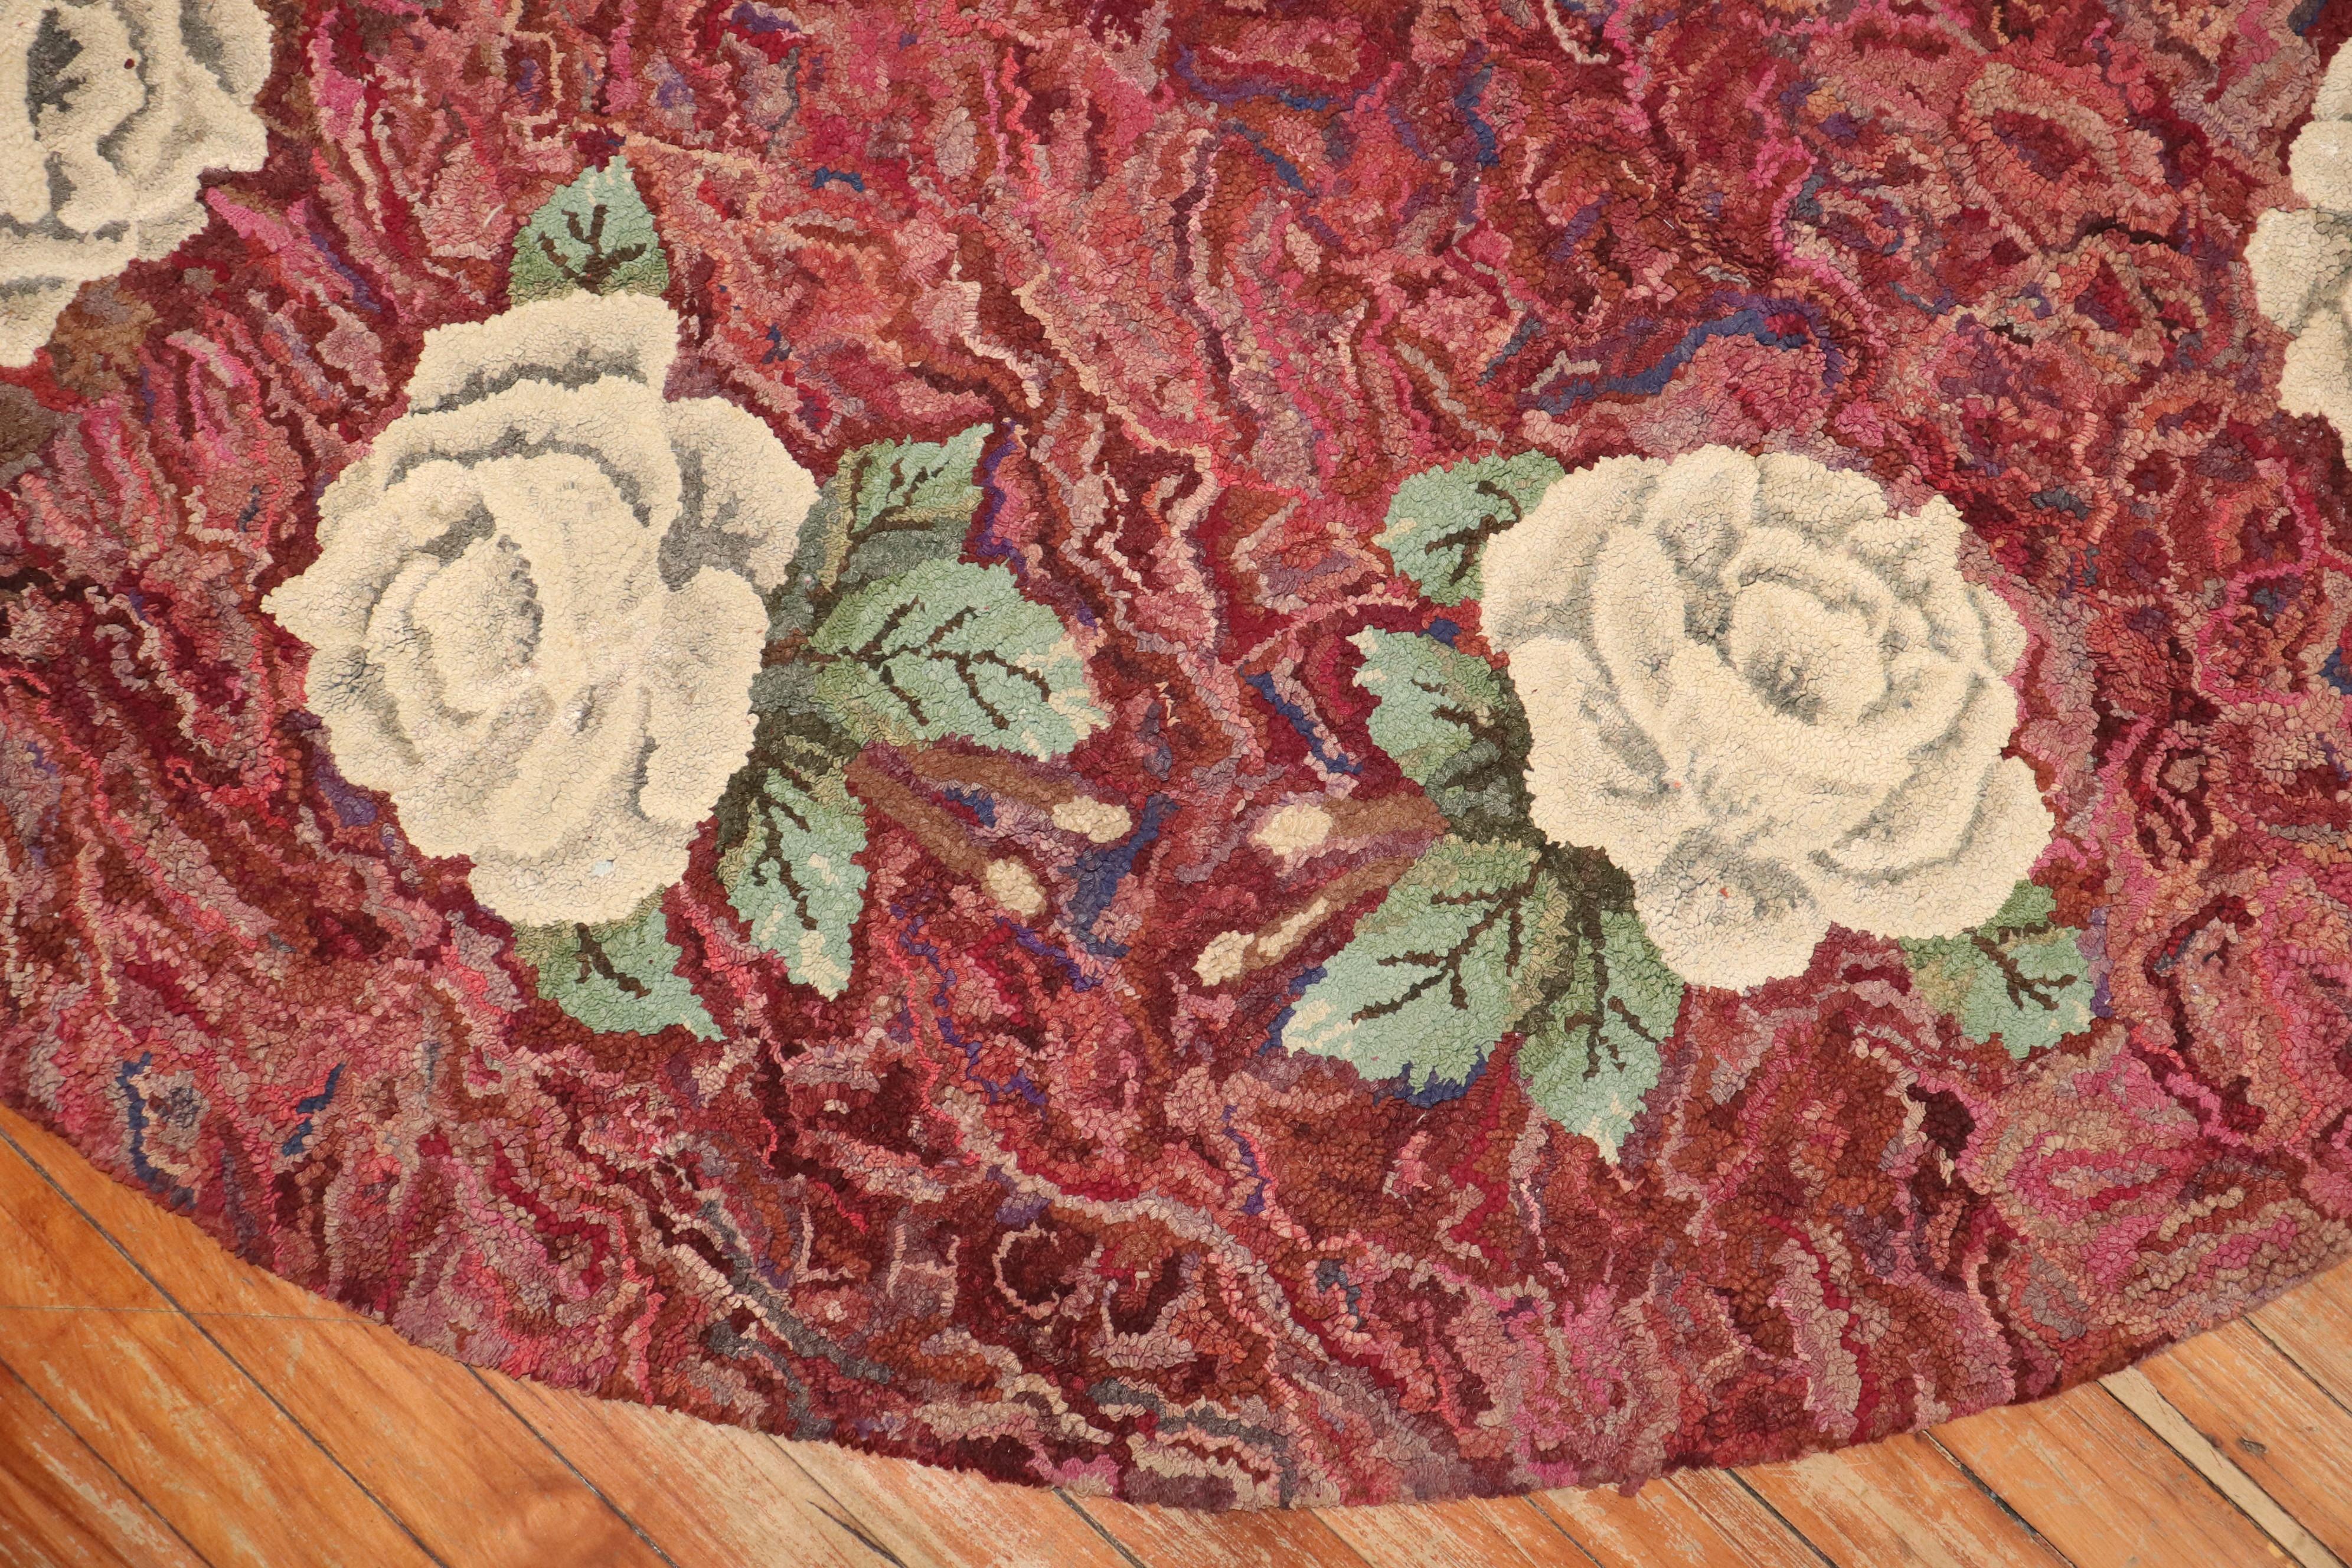 A compelling Mid-20th Century American hooked oval size floral botanical rug

Measures: 6'8